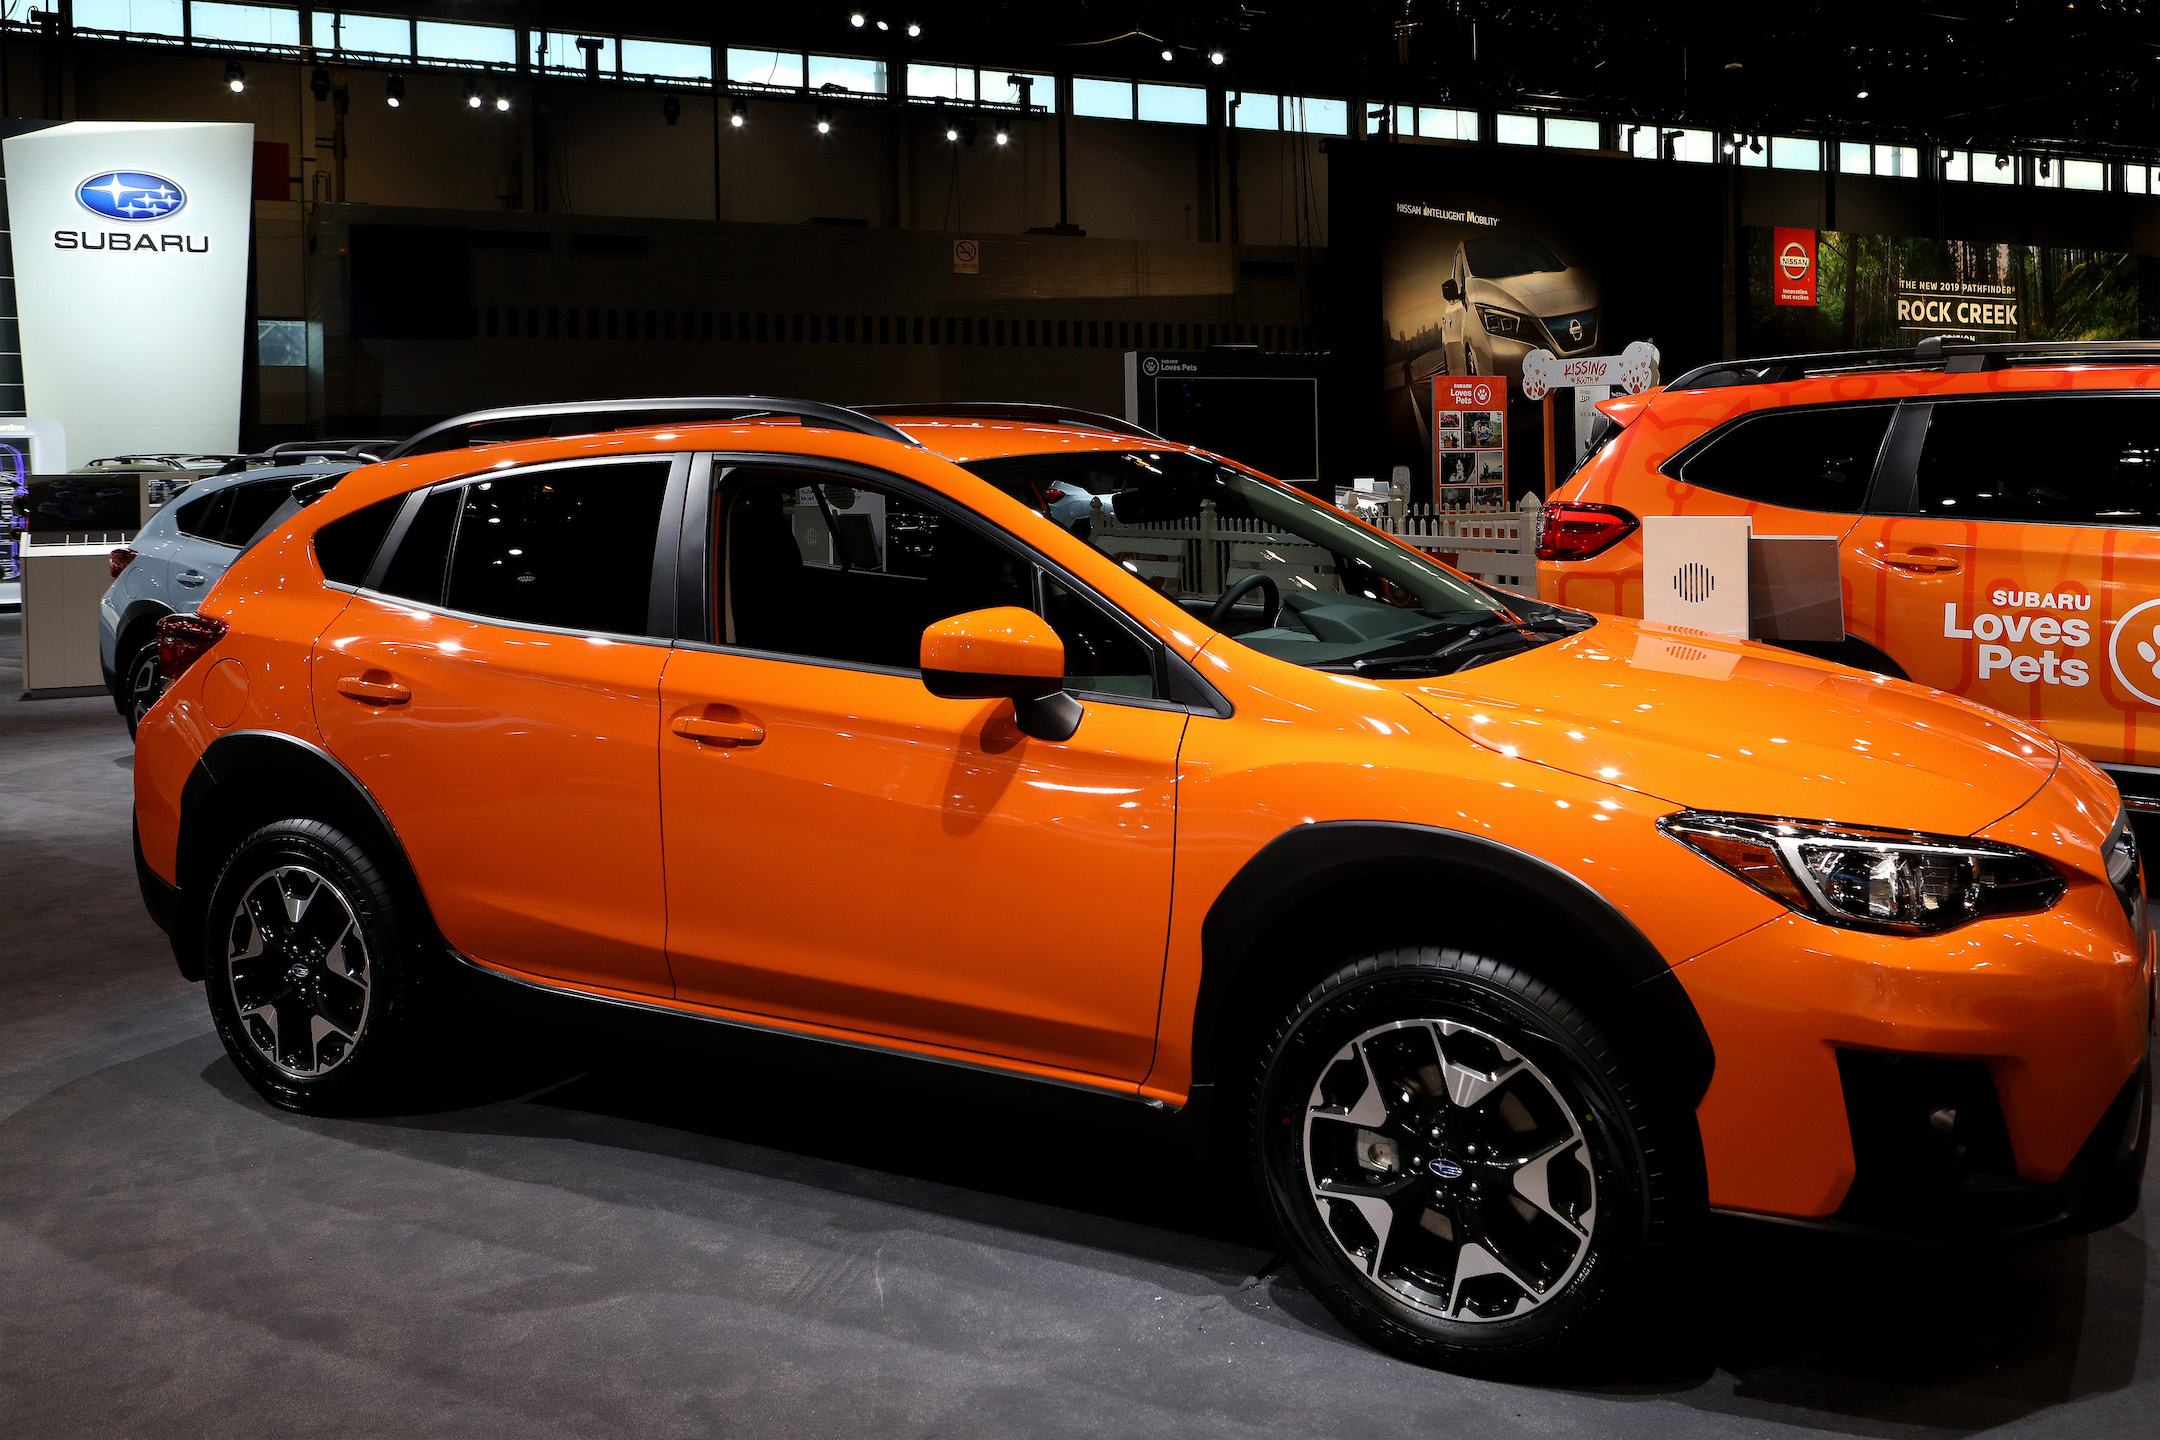 2019 Subaru Crosstrek is on display at the 111th Annual Chicago Auto Show at McCormick Place